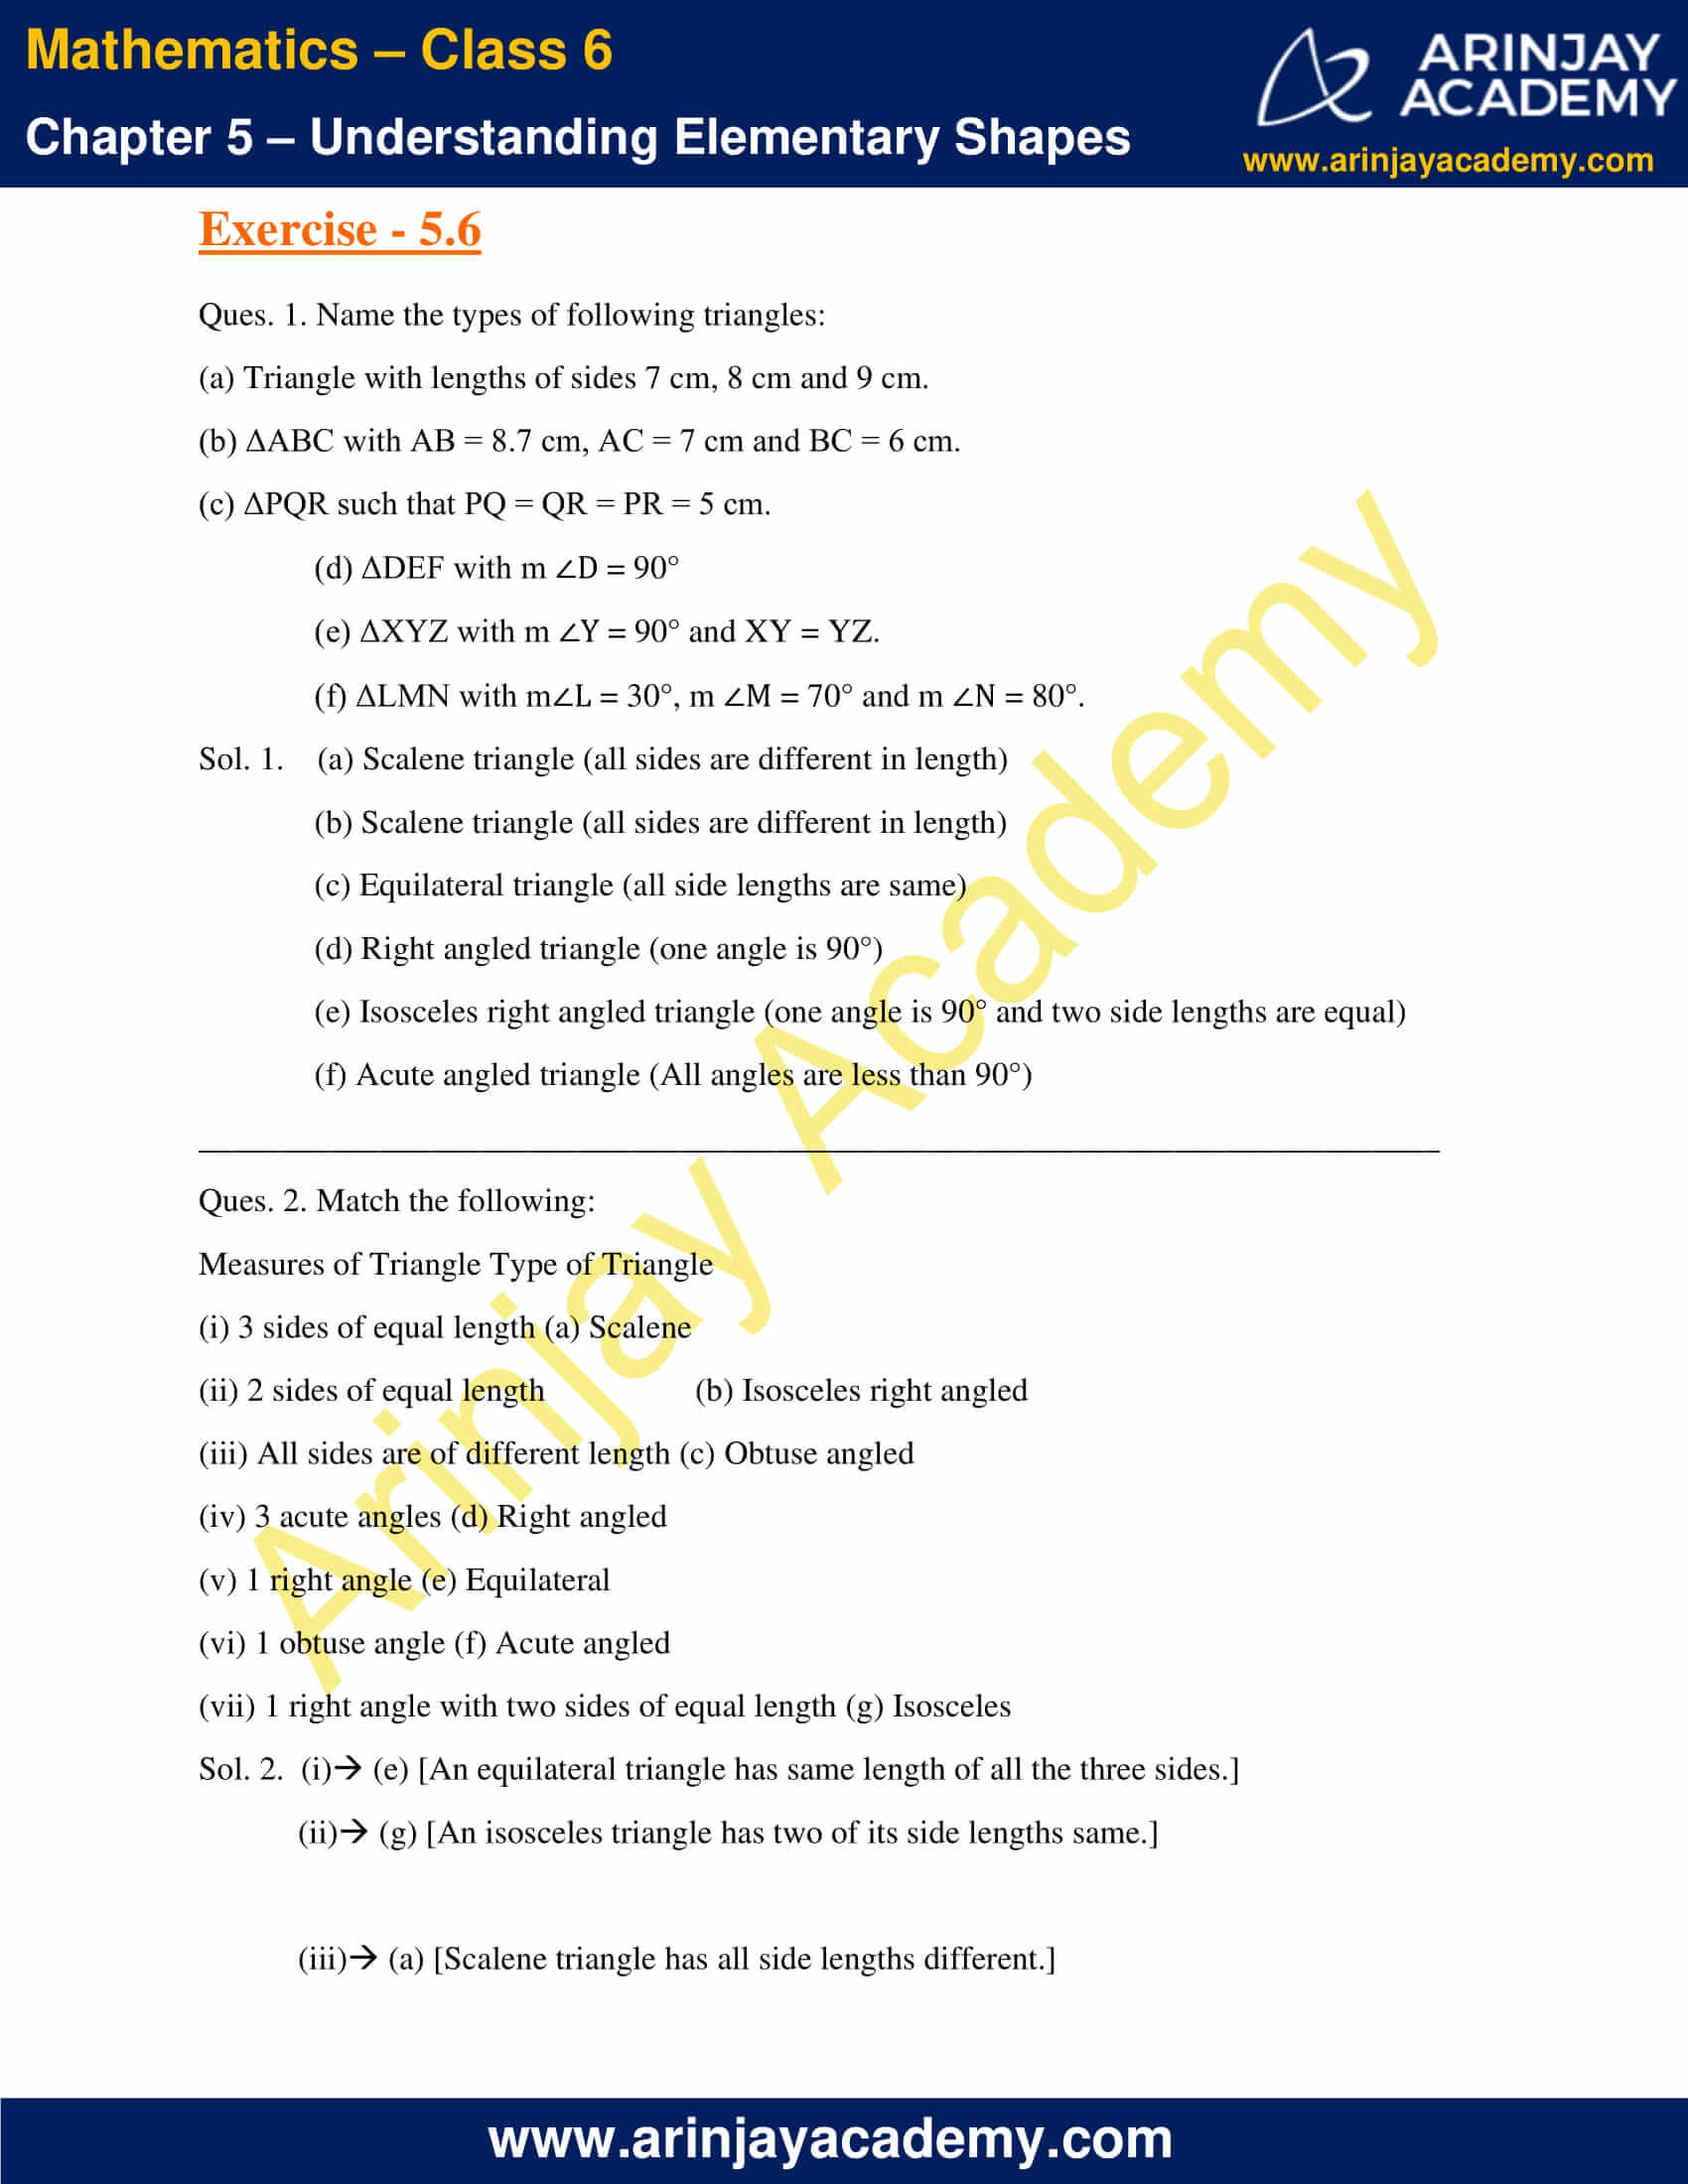 NCERT Solutions for Class 6 Maths Chapter 5 Exercise 5.6 image 1